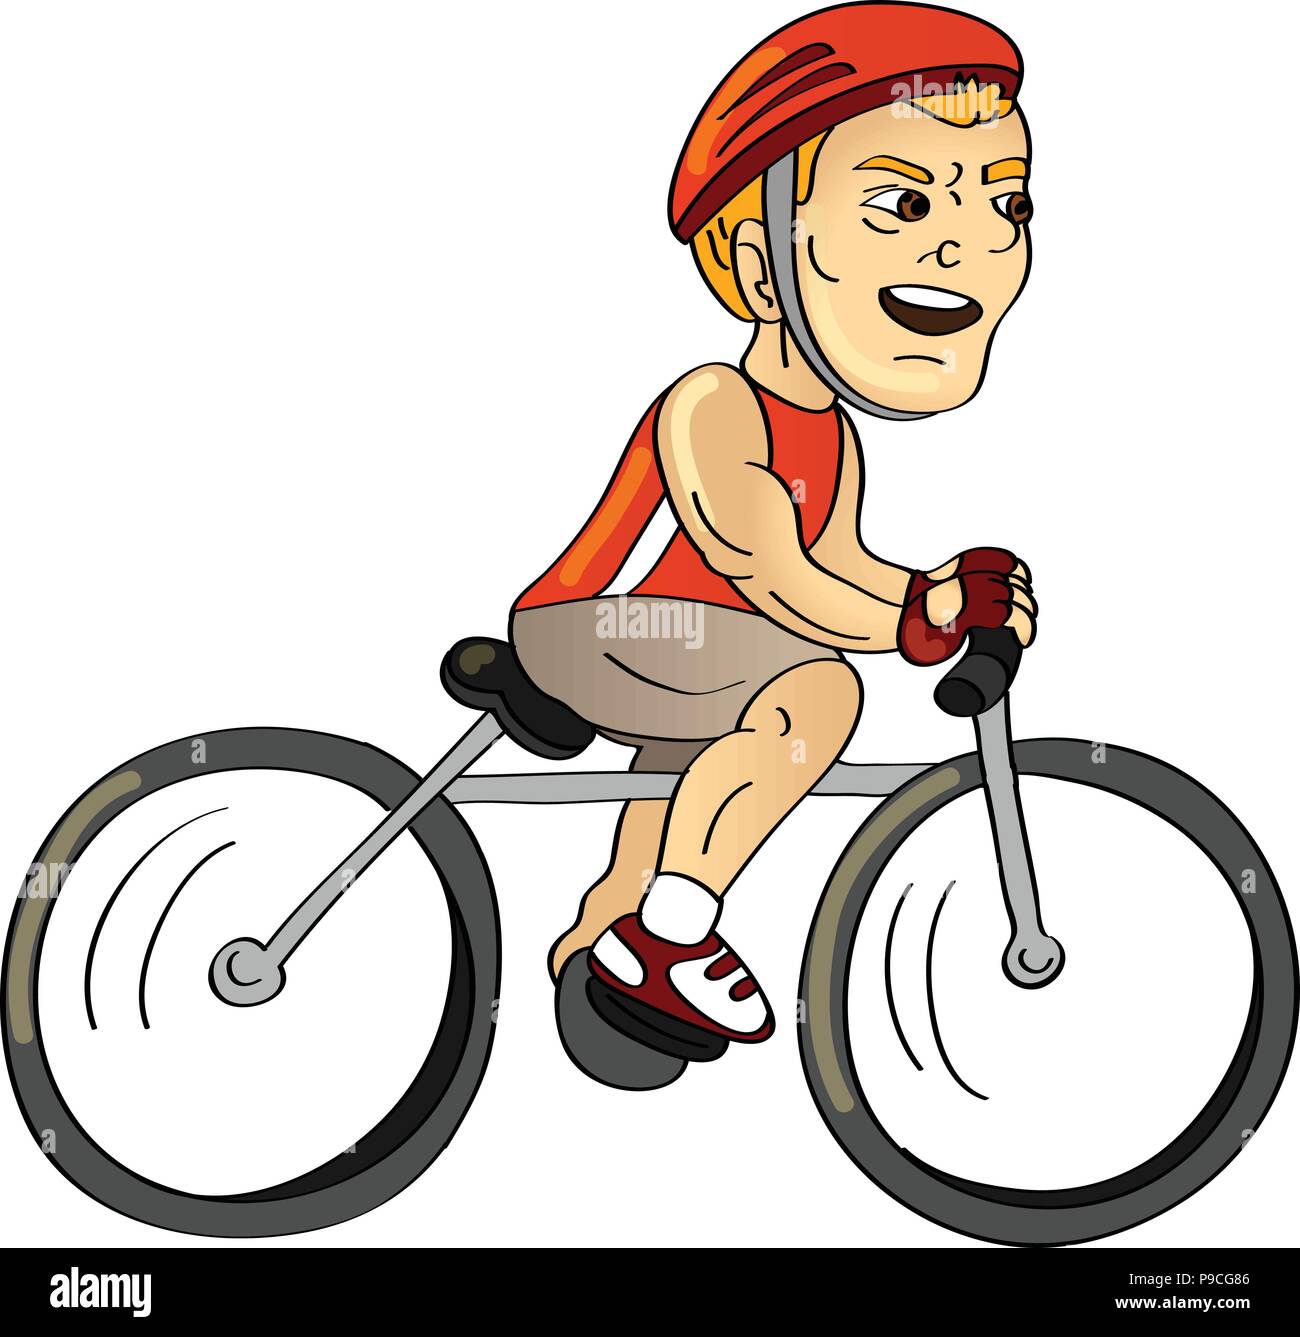 Cartoon Vector Illustration Of A Bicycle Rider Stock Vector Image Art Alamy